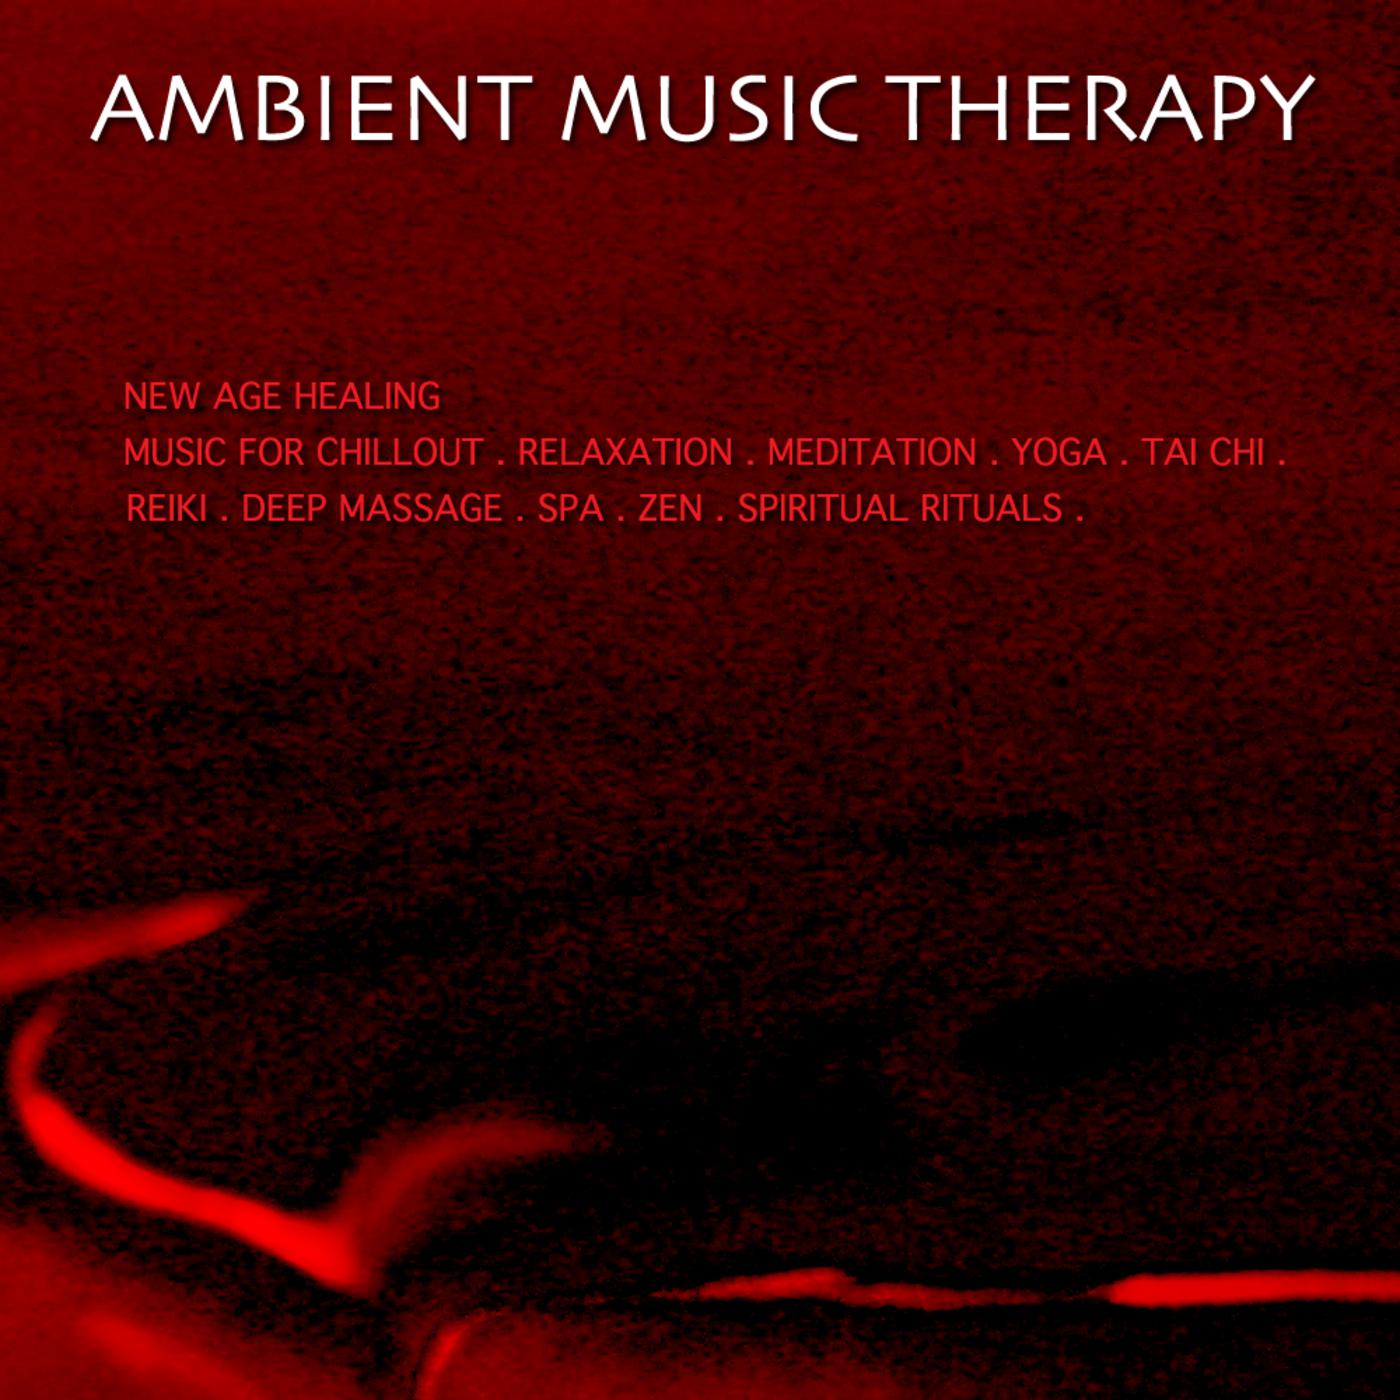 1. New Age Healing Music for Chillout. Relaxation. Meditation...